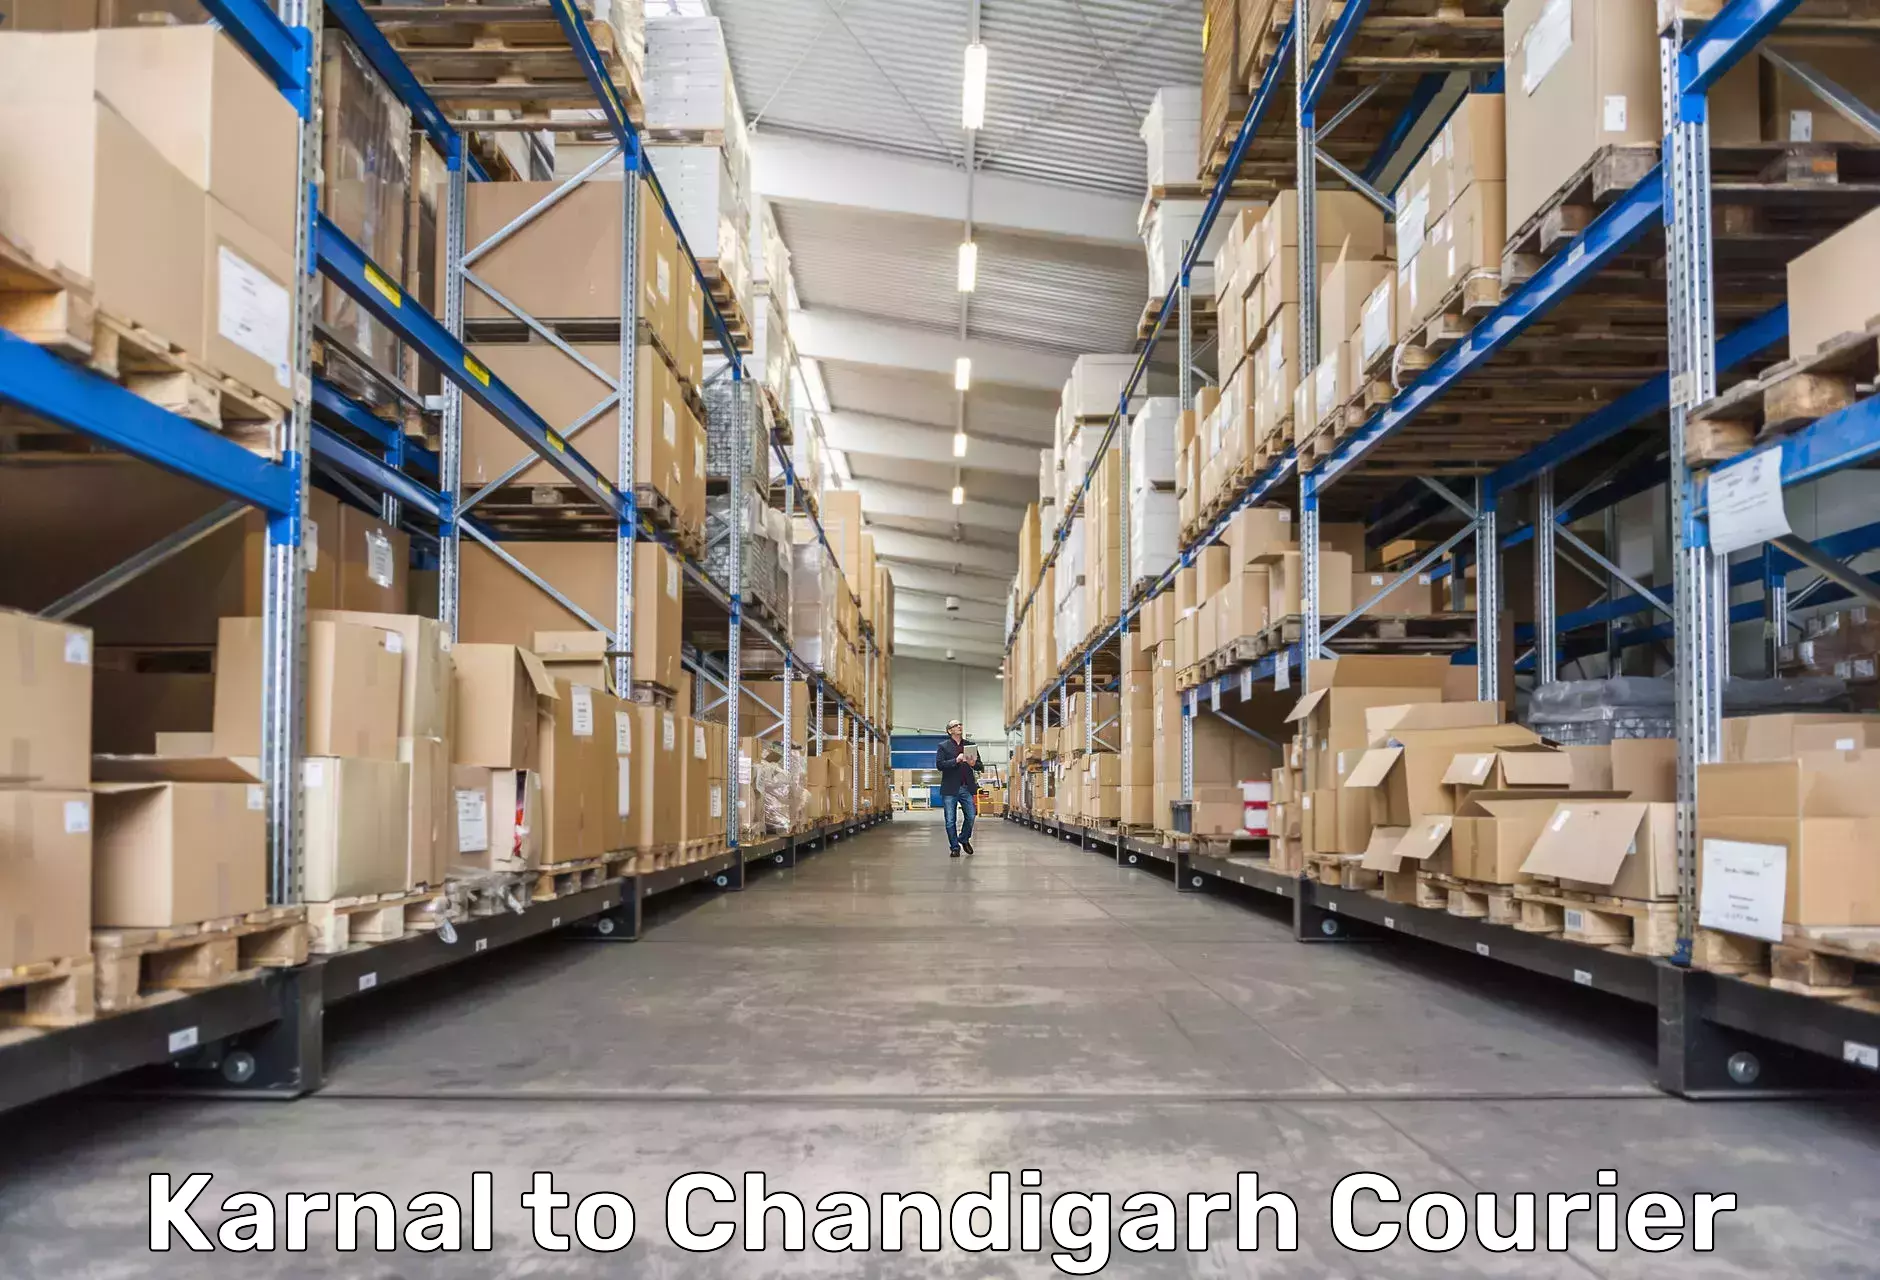 Package delivery network Karnal to Panjab University Chandigarh